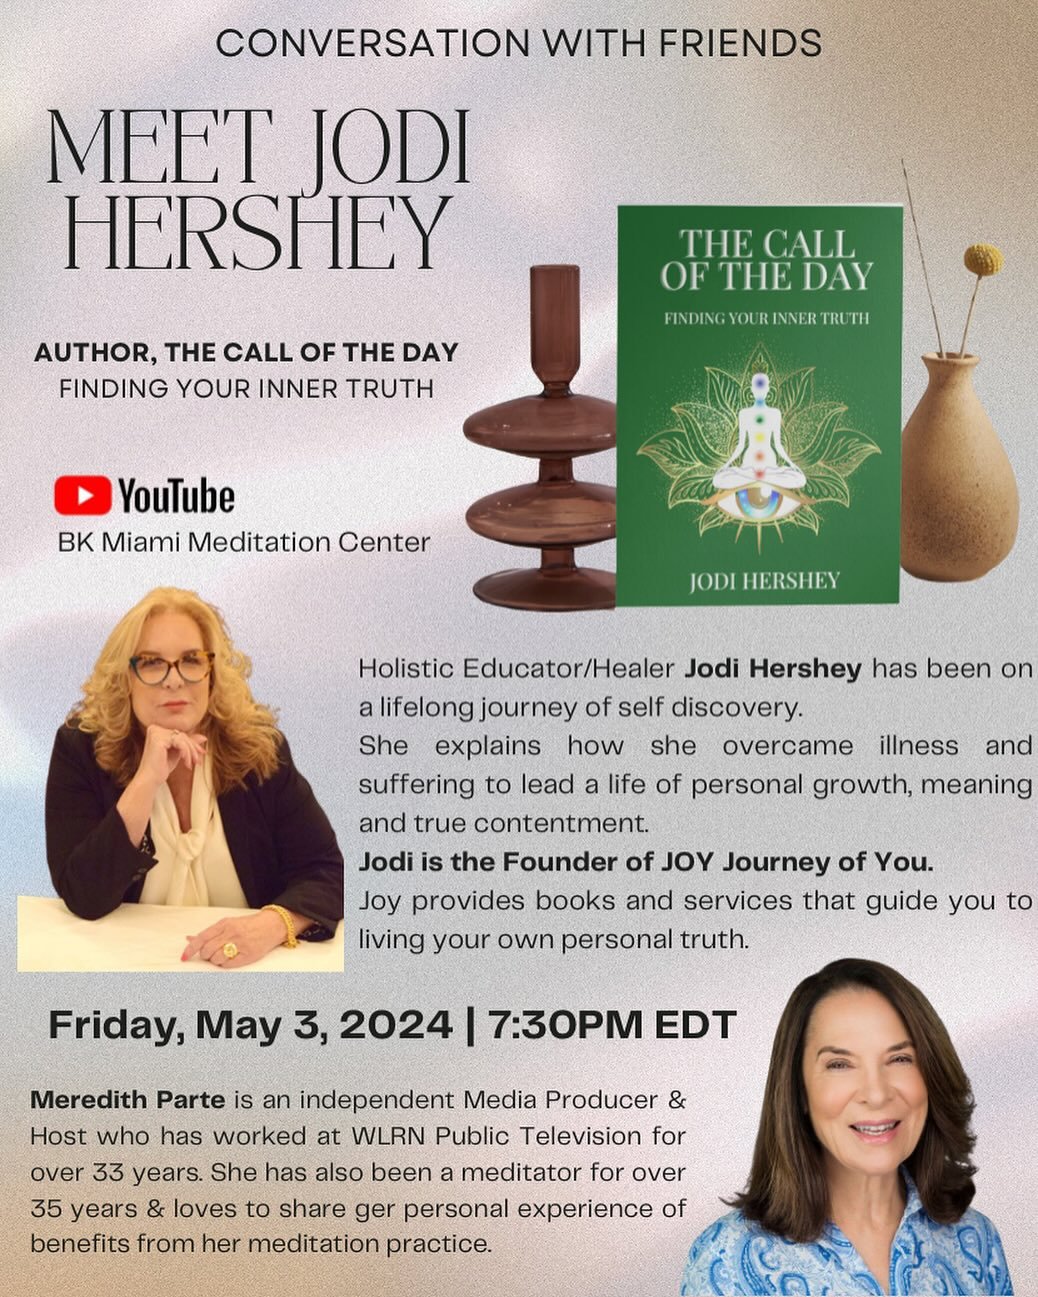 Conversation with Friends &bull; Join the conversation this #Friday and meet #JodiHershey #Author of The Call of the Day and #Founder of #JOY Journey of You 📺 YouTube BK Miami Meditation Center &bull; #MeredithParte